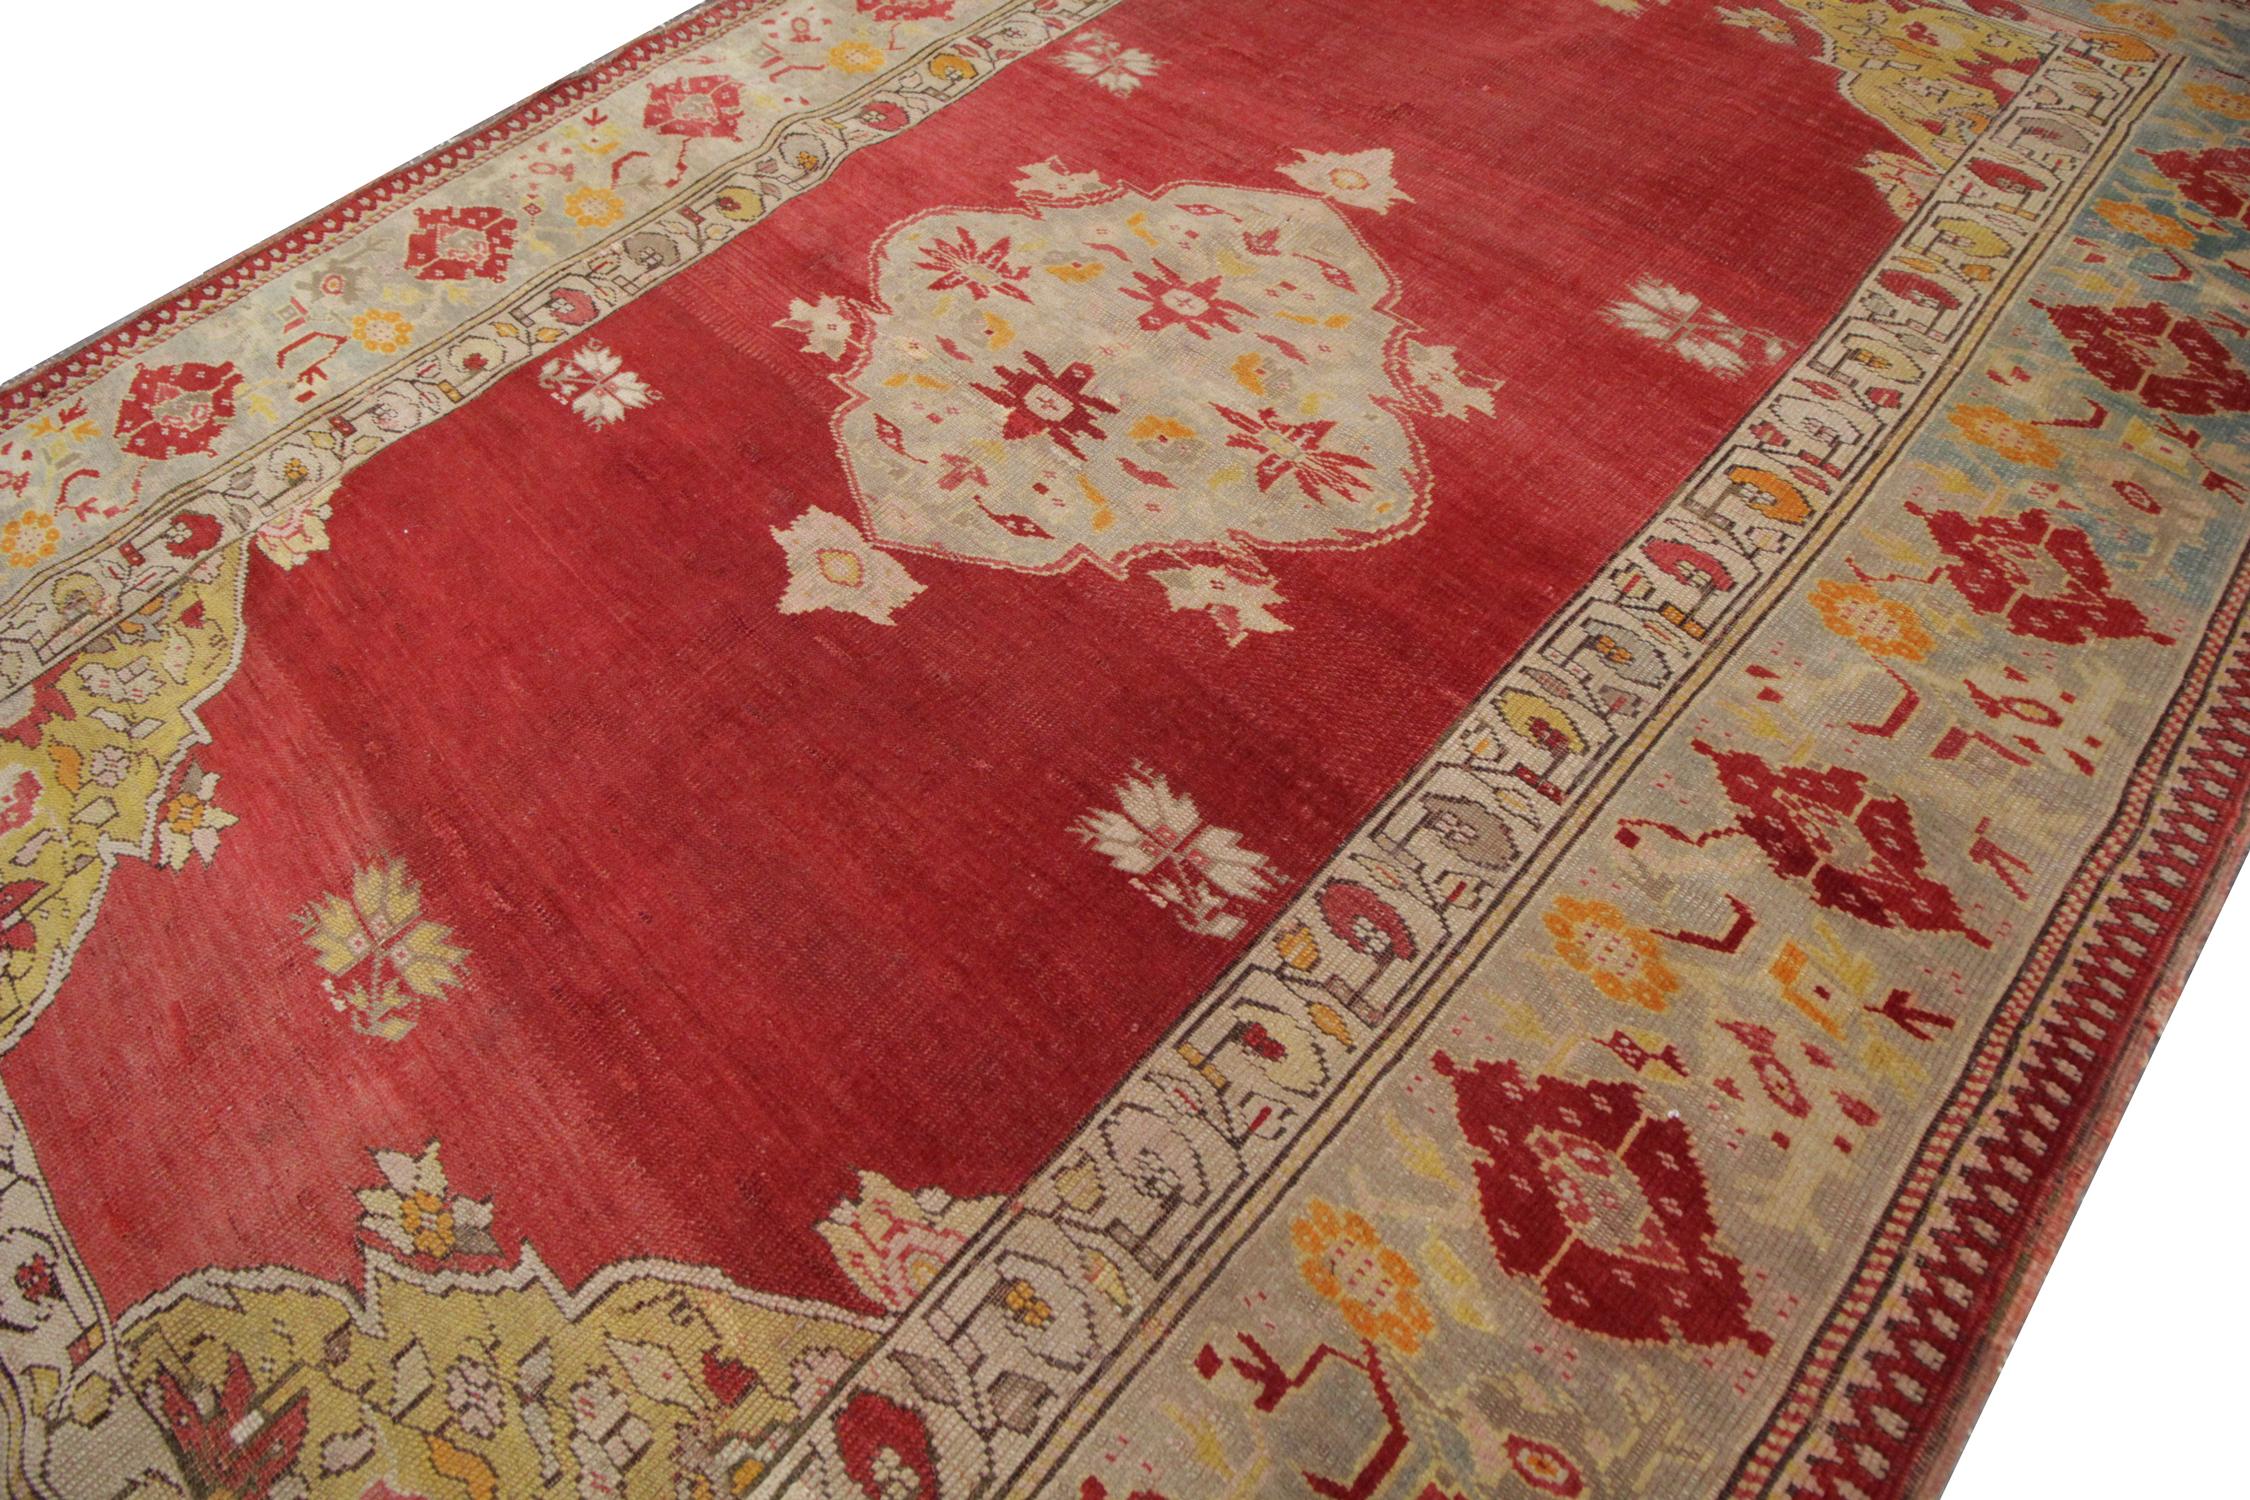 Handmade in Turkey this Borlou rug features a stunning medallion design woven on a rich red background. The simple central design is then enclosed by a highly-detailed repeat pattern border.
This high-quality Turkish rug is perfect for both modern